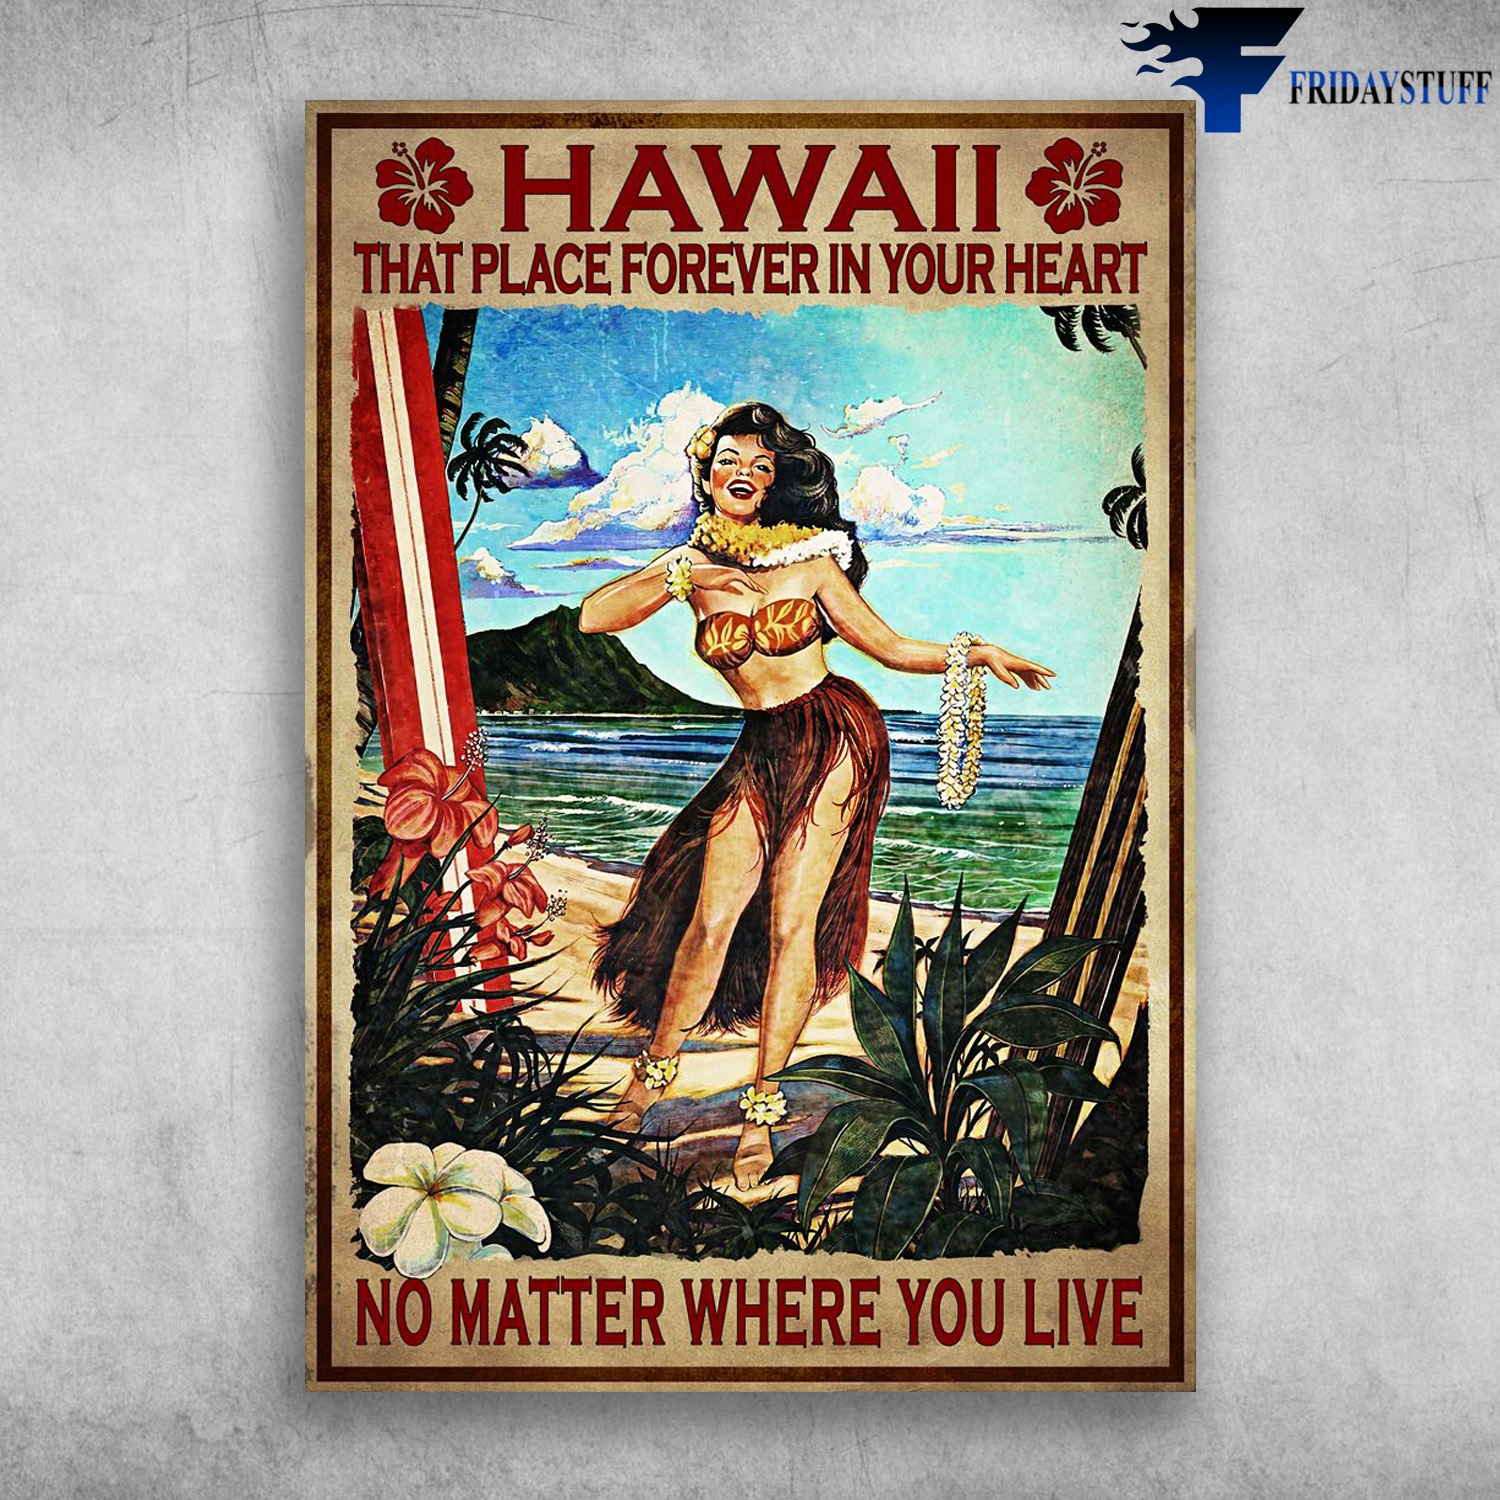 Hawaii Girl - Hawaii, That Place Forever In Your Heart, No Matter Where You Live